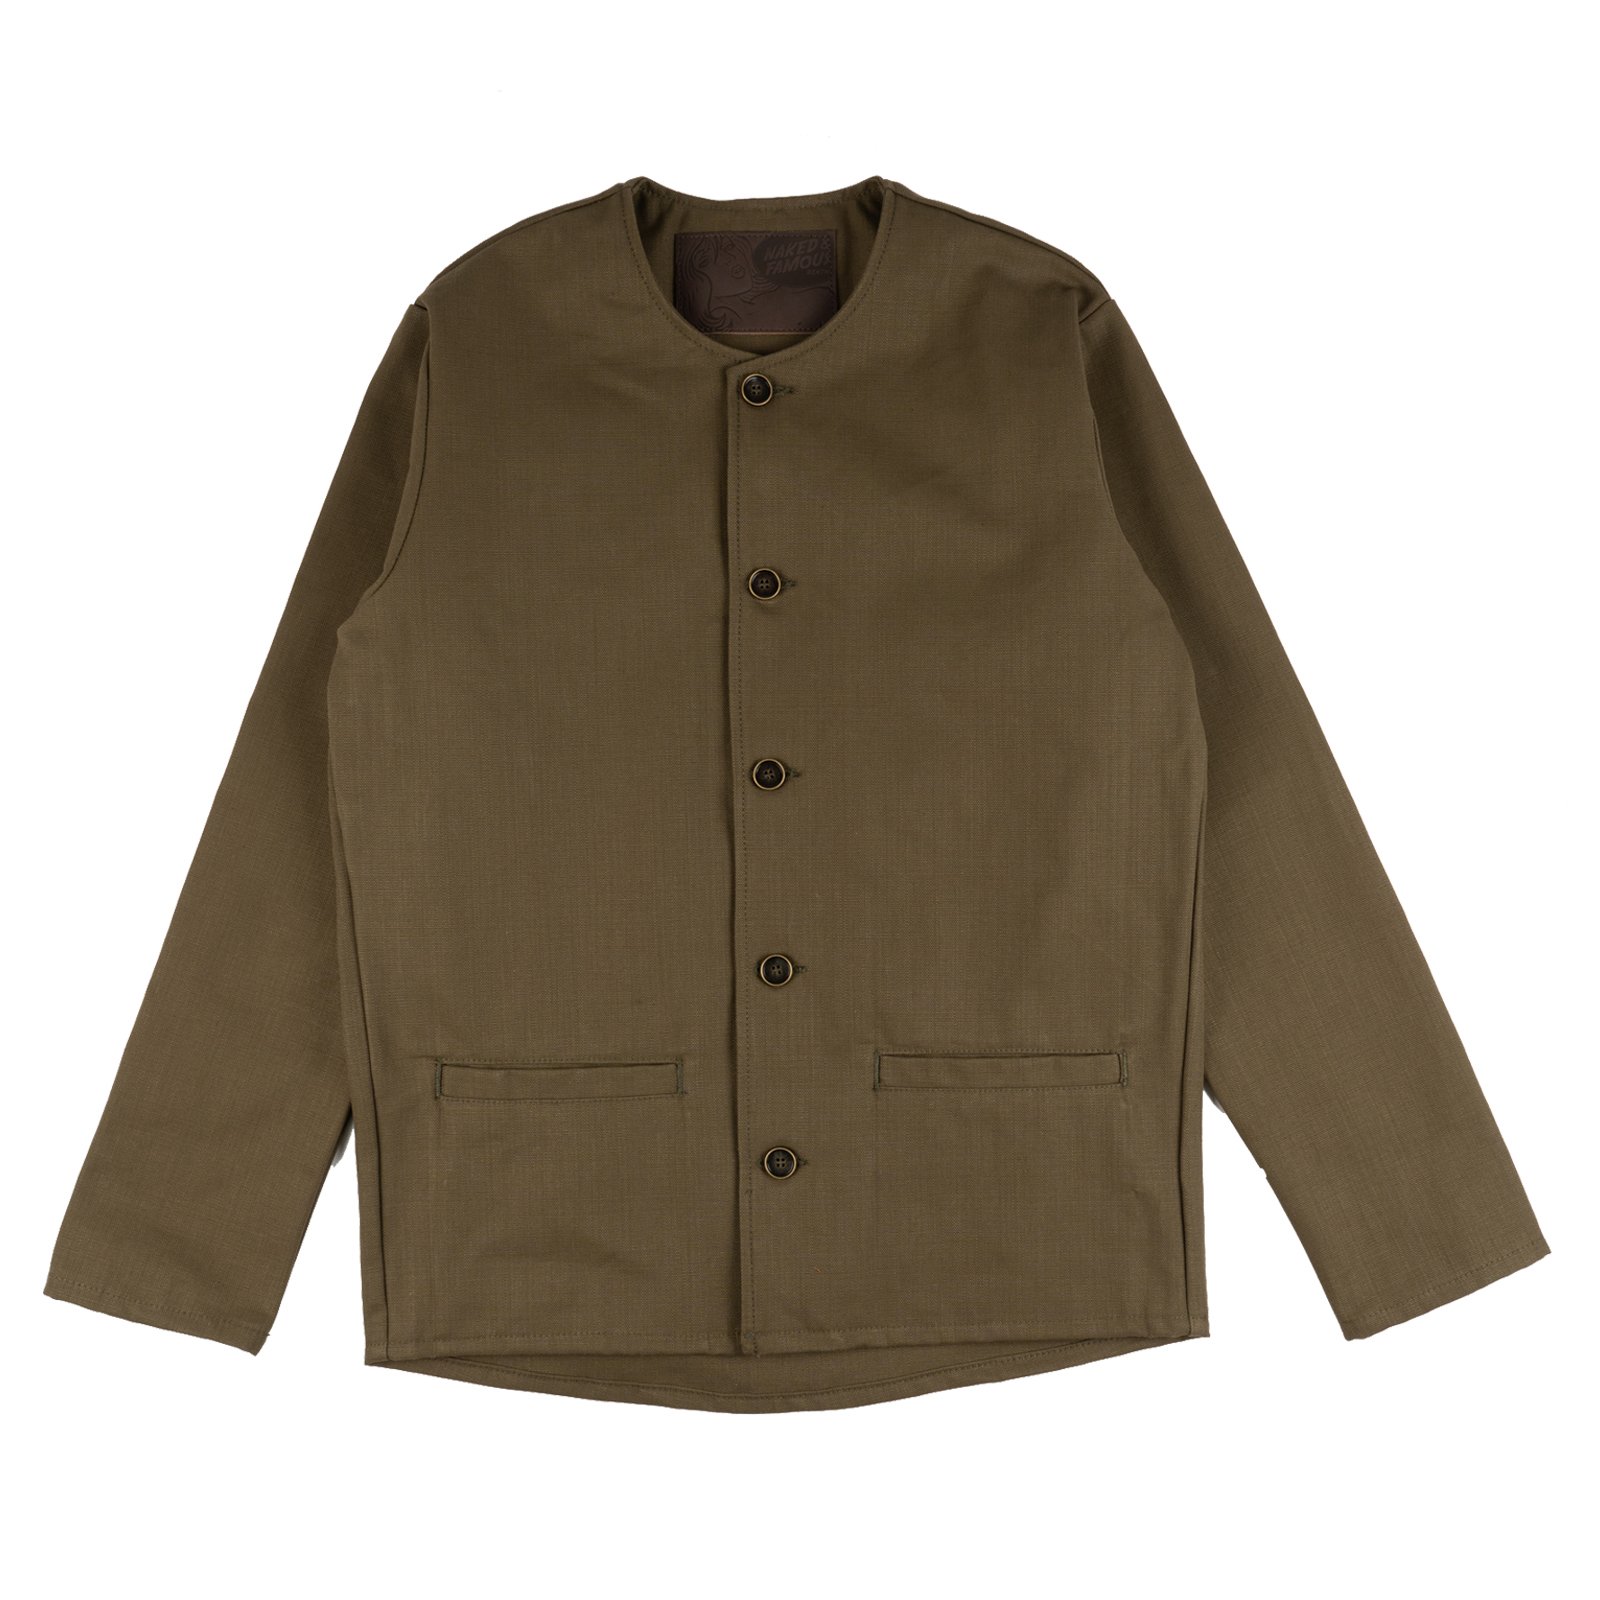  Smart Jacket - Raw Cotton Canvas - Olive - flat front 